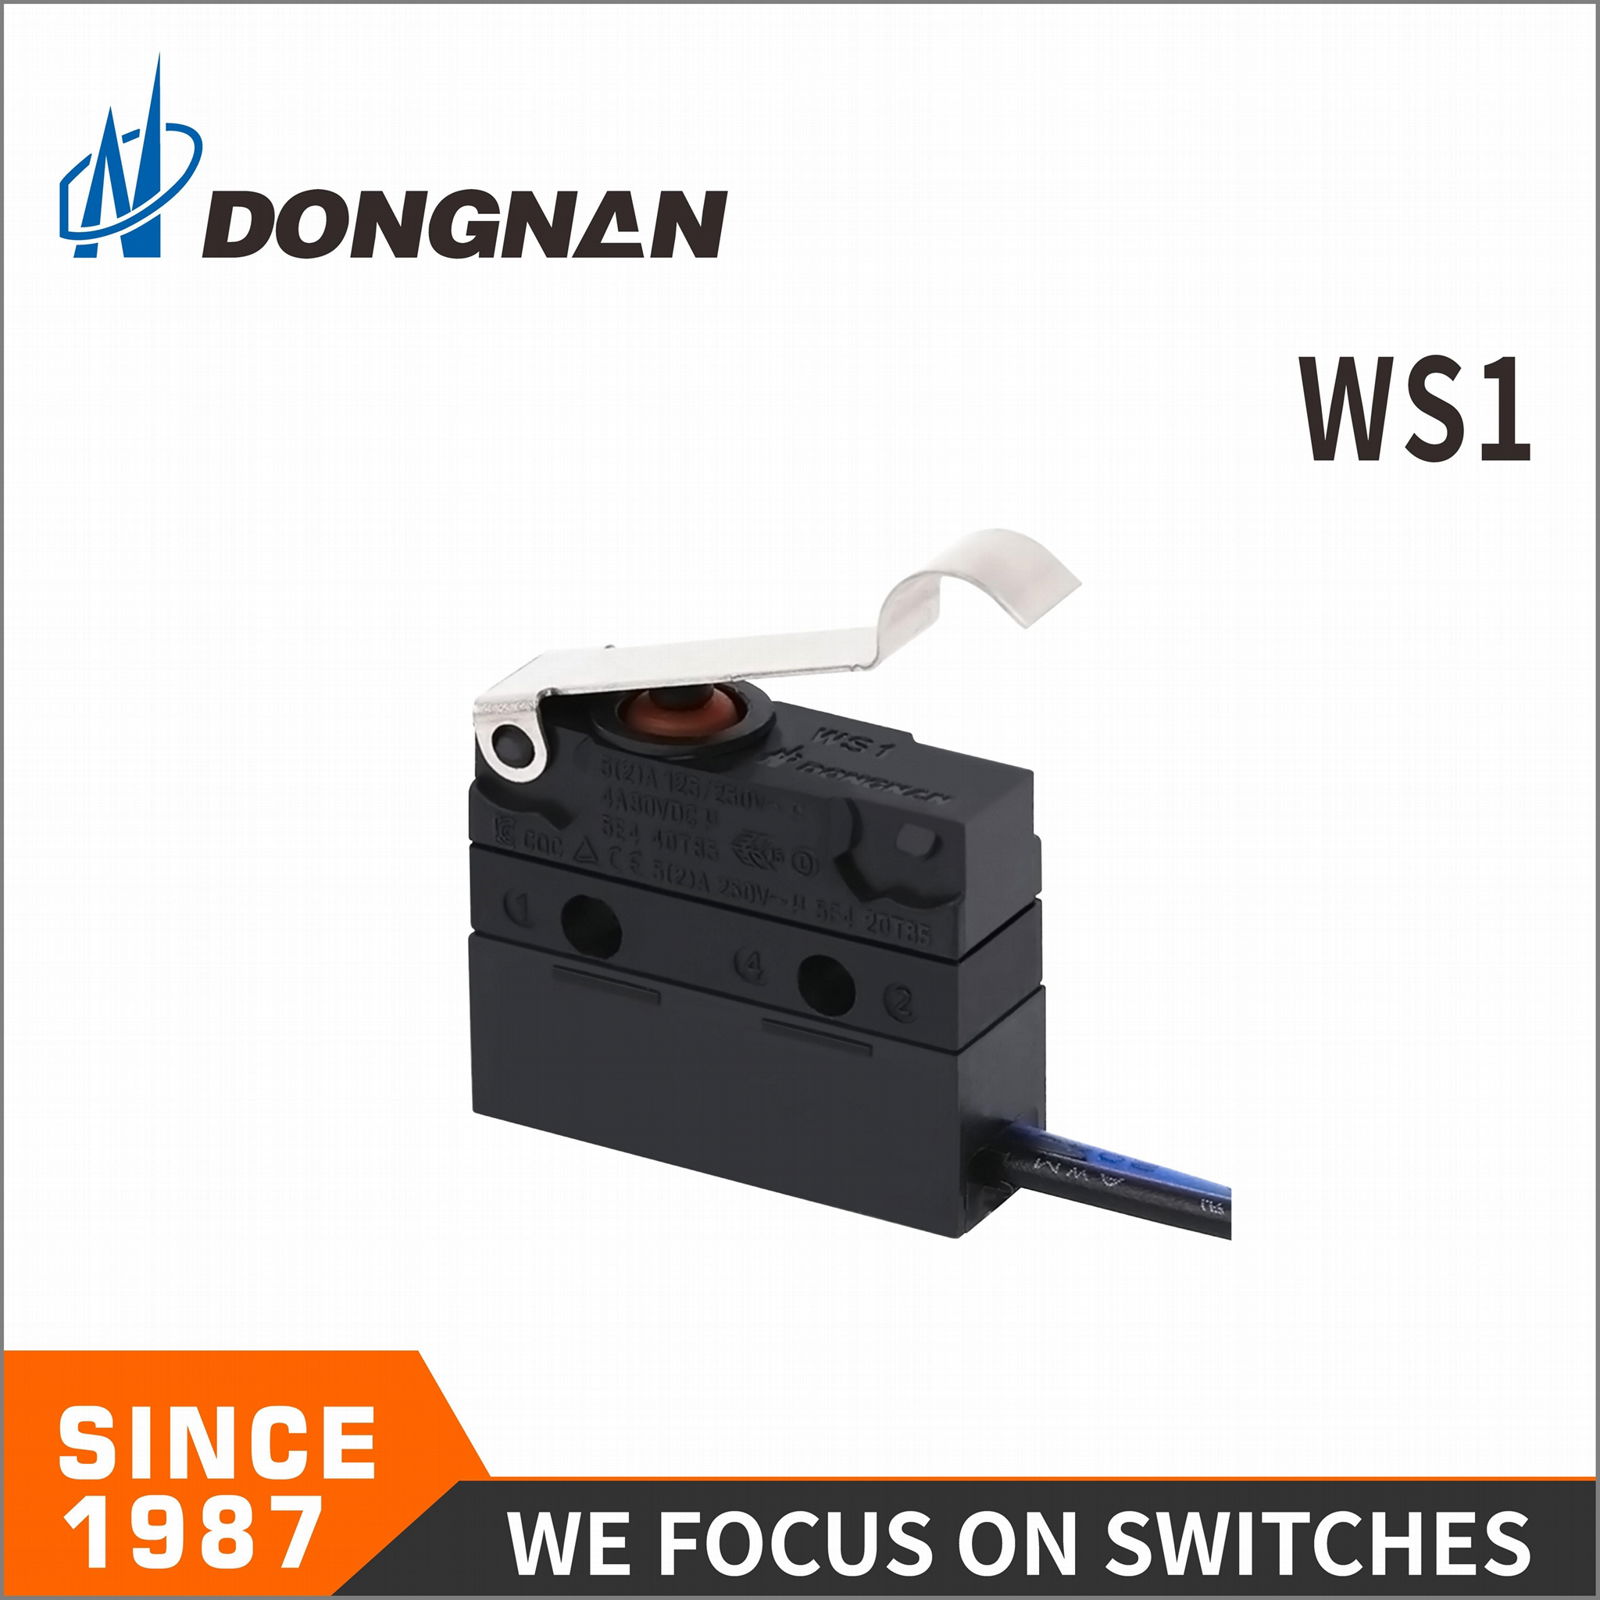 Dongnan IP67 Type Sealed Waterproof Switch Ws1 for Refrigerator 3